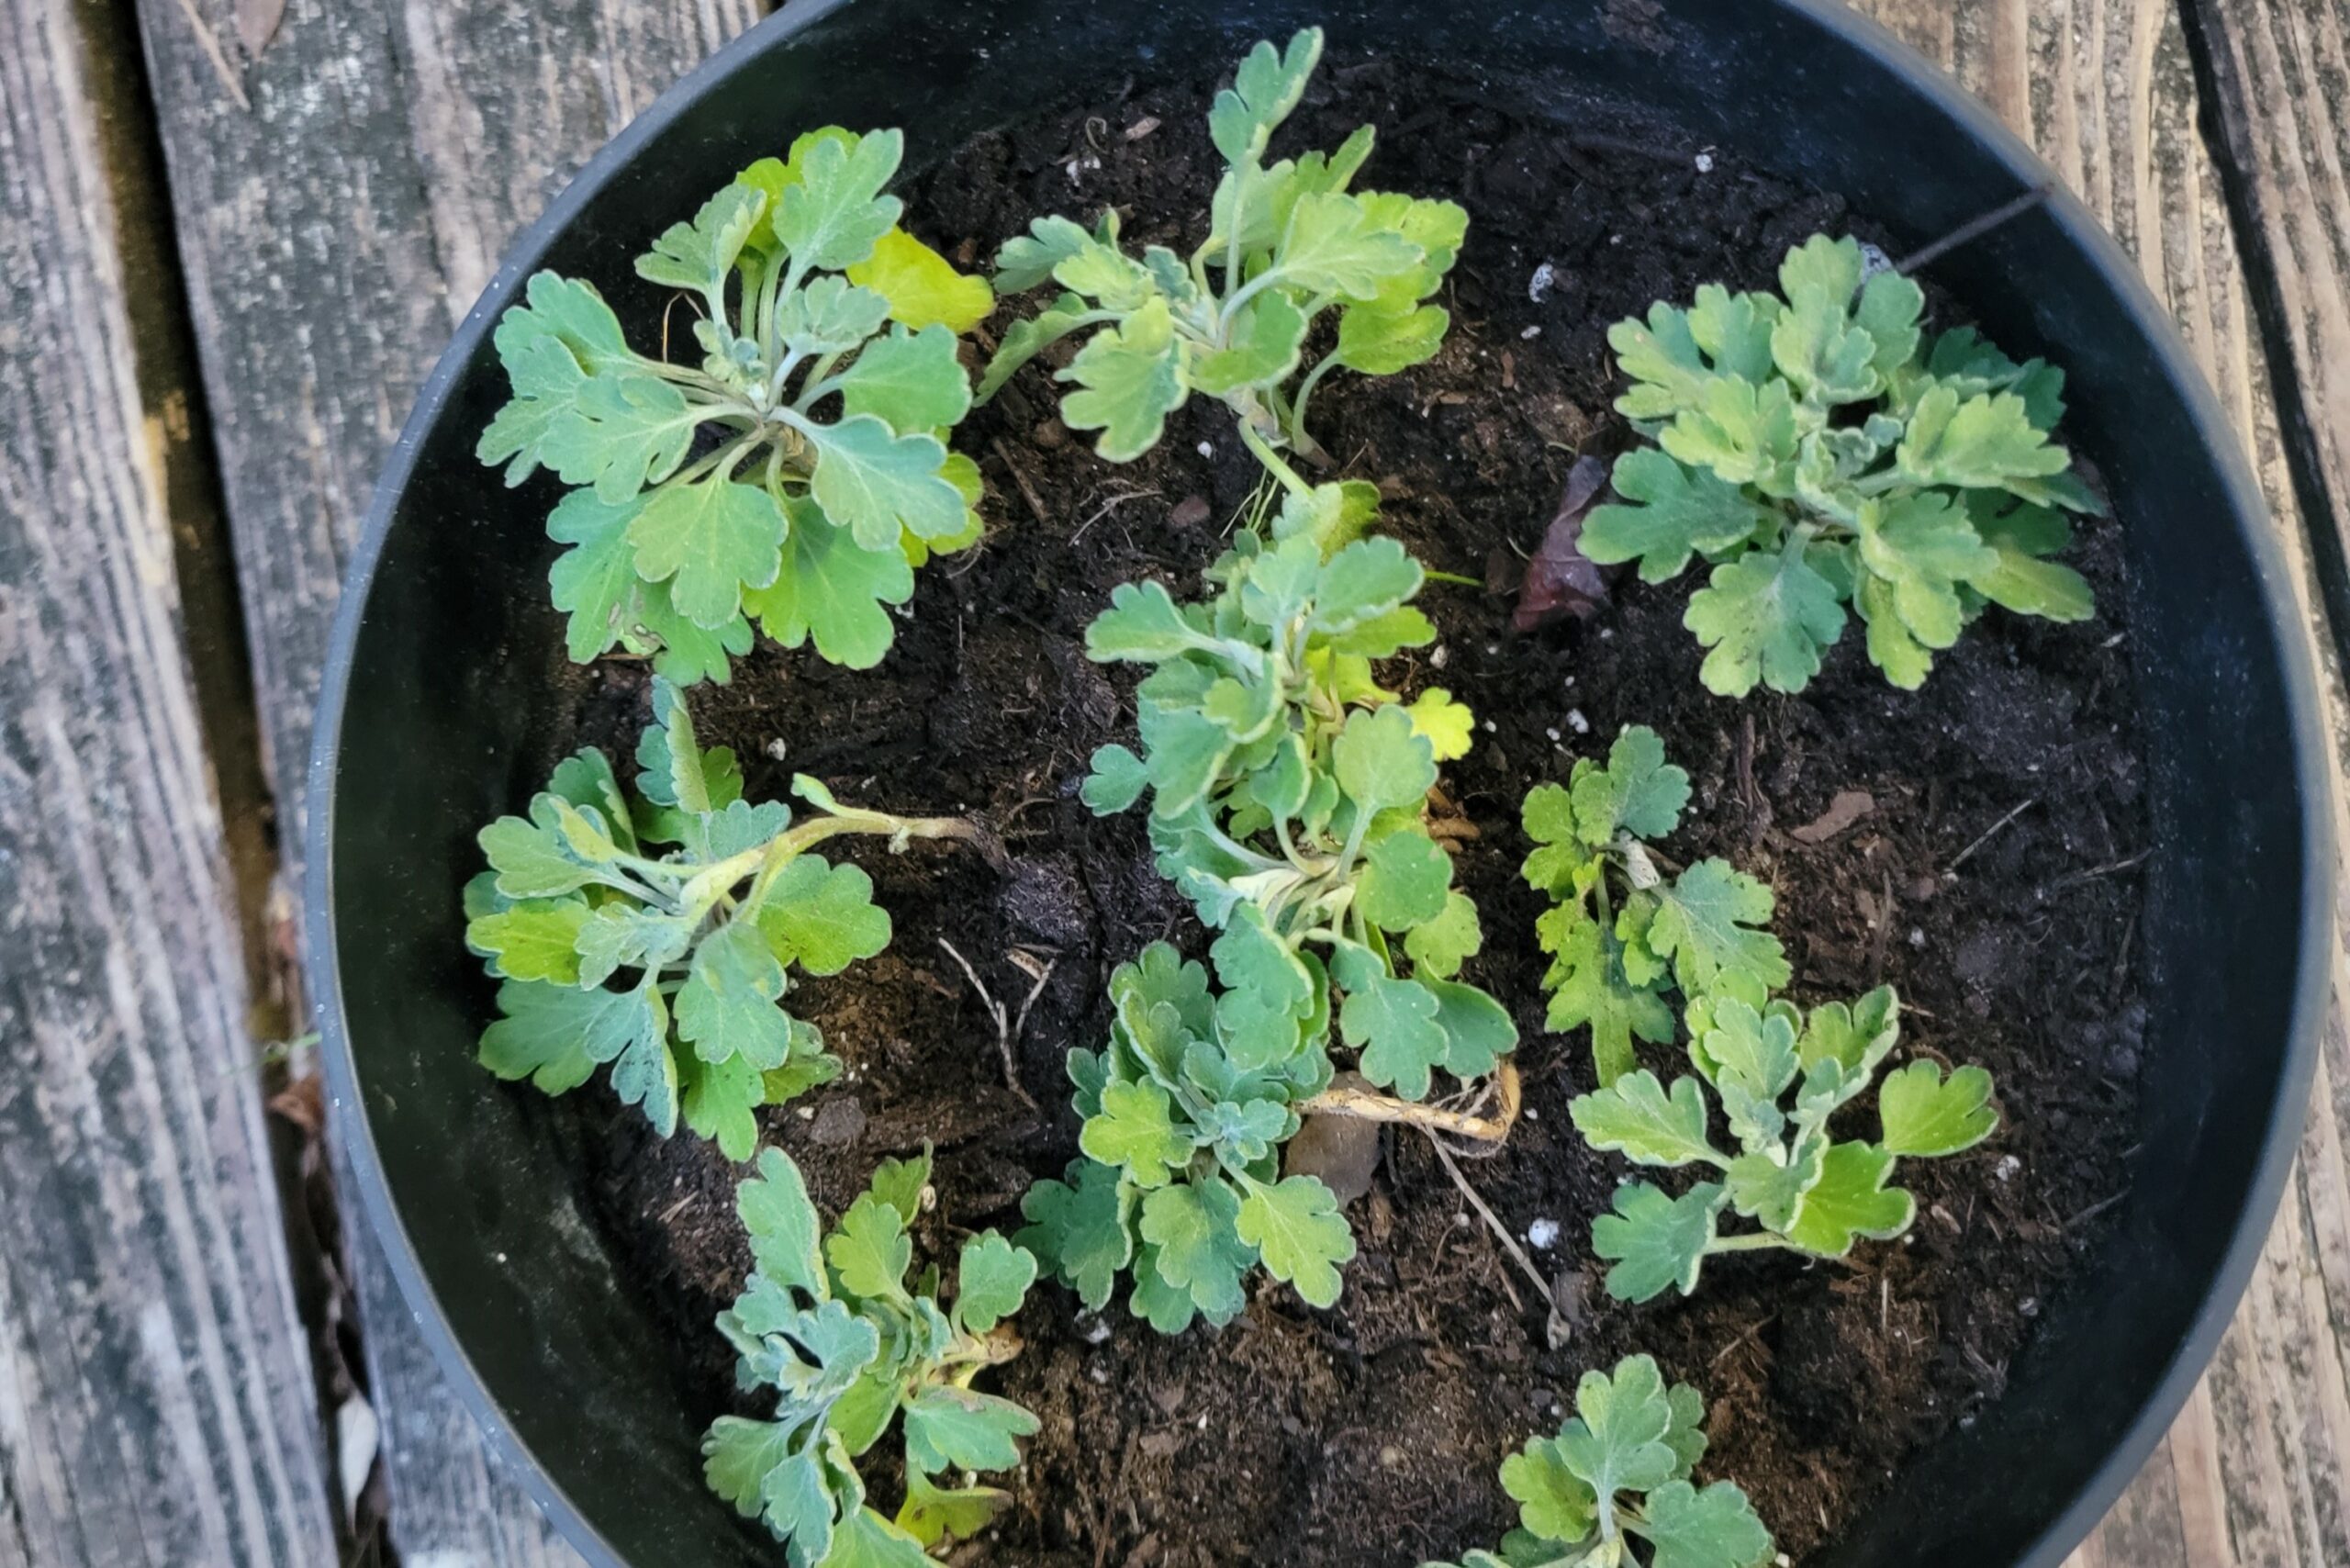 Chrysanthemum stems planted in one pot